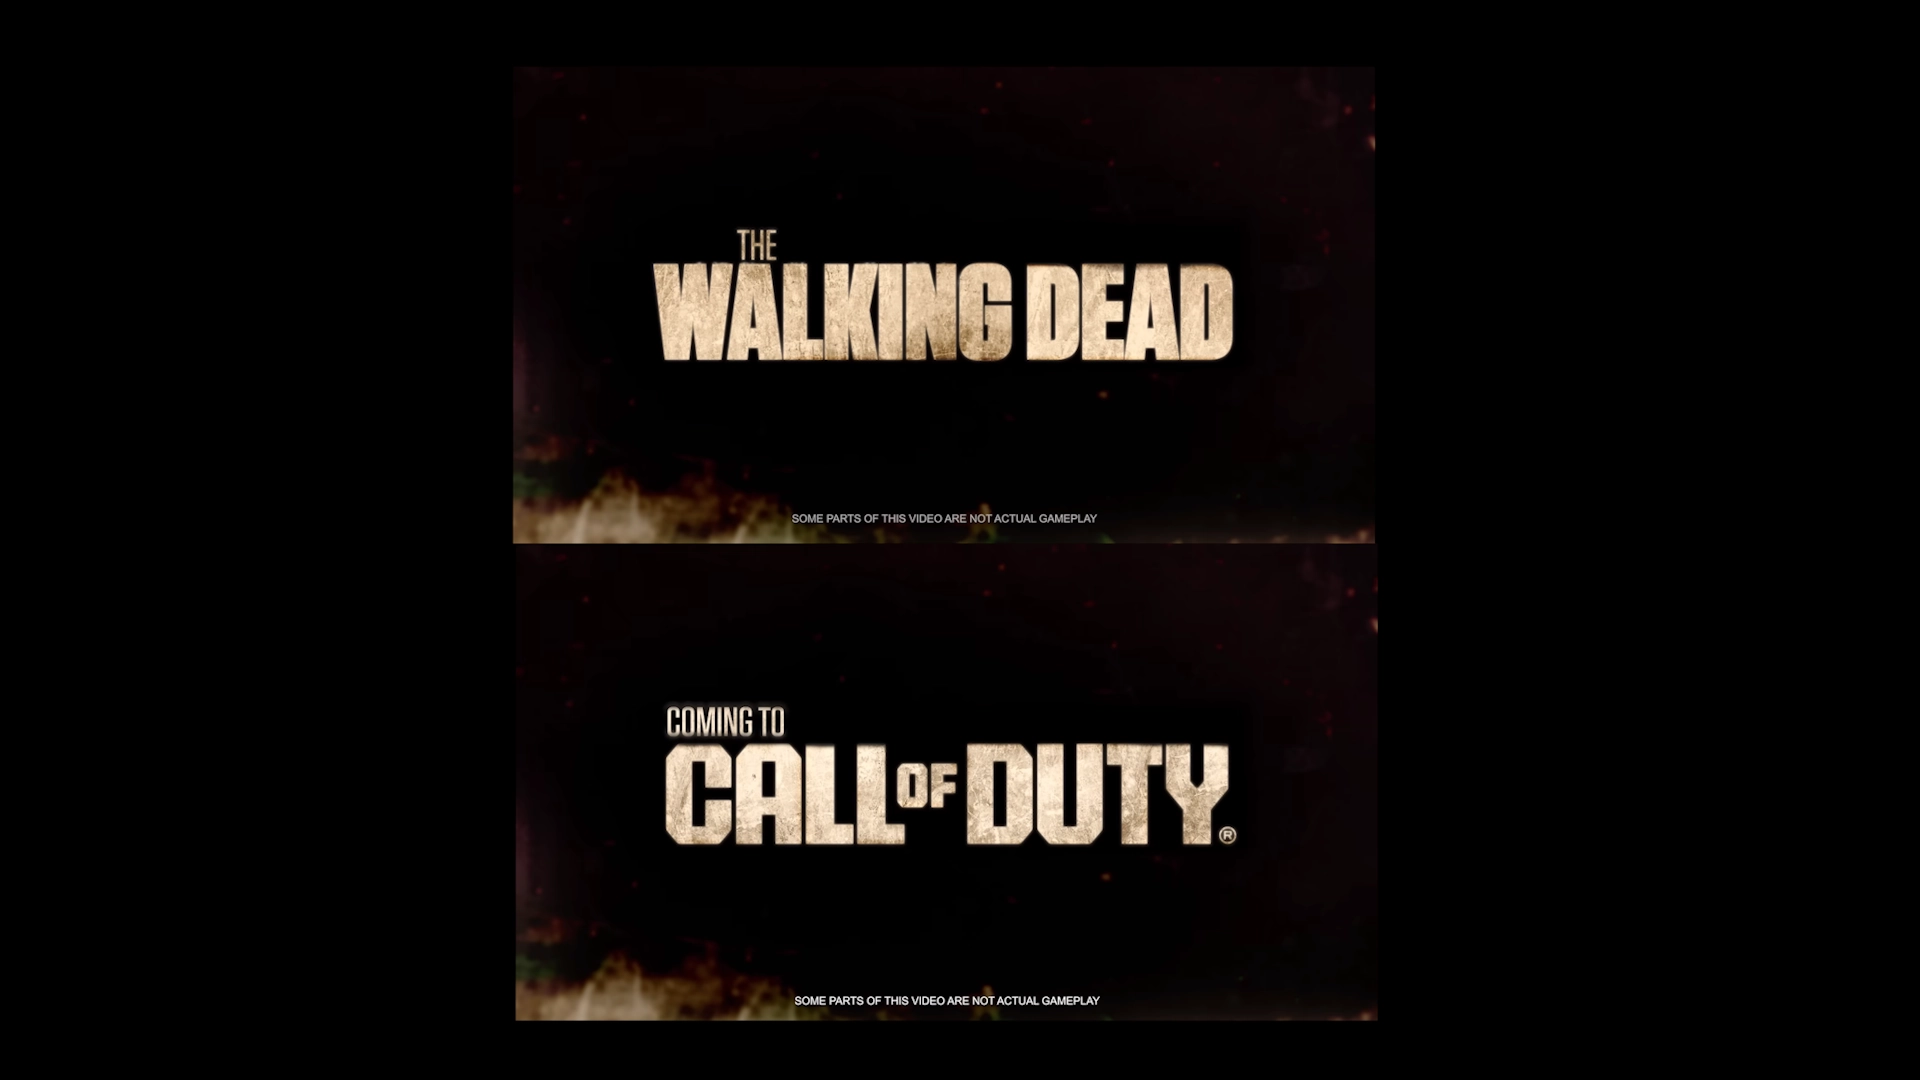 Call of Duty and The Walking Dead crossover announced